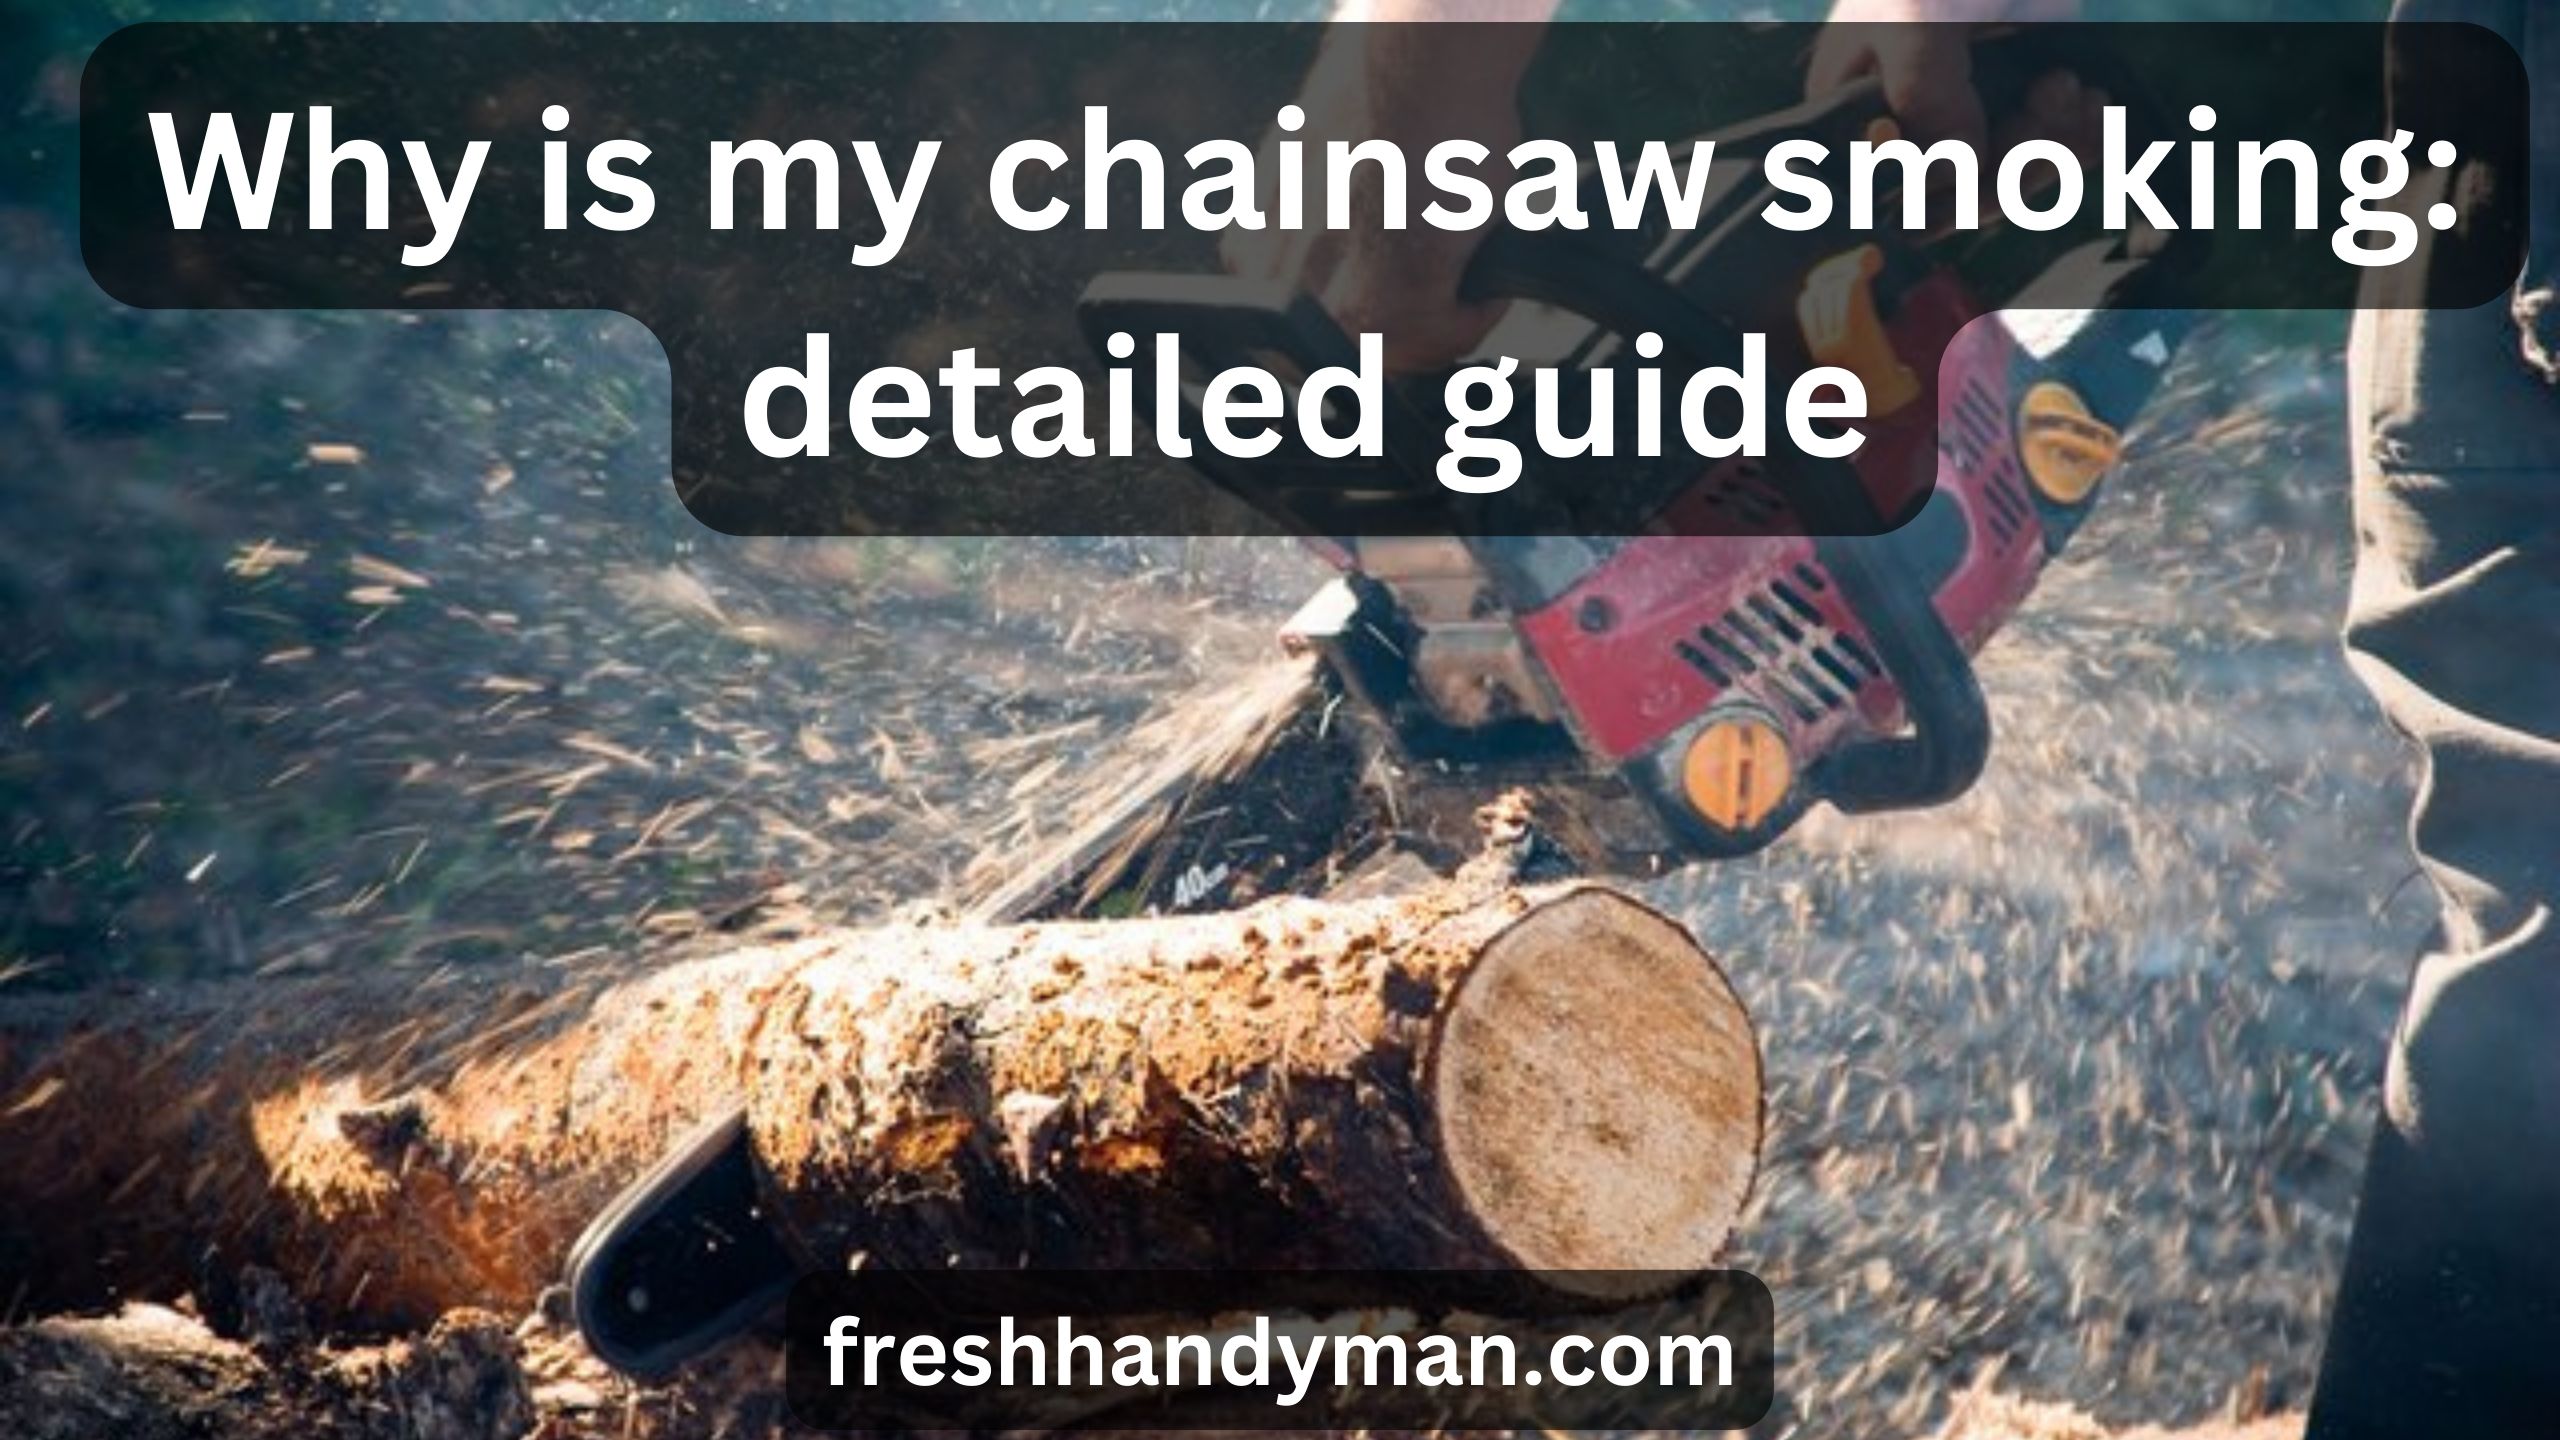 Why is my chainsaw smoking: detailed guide